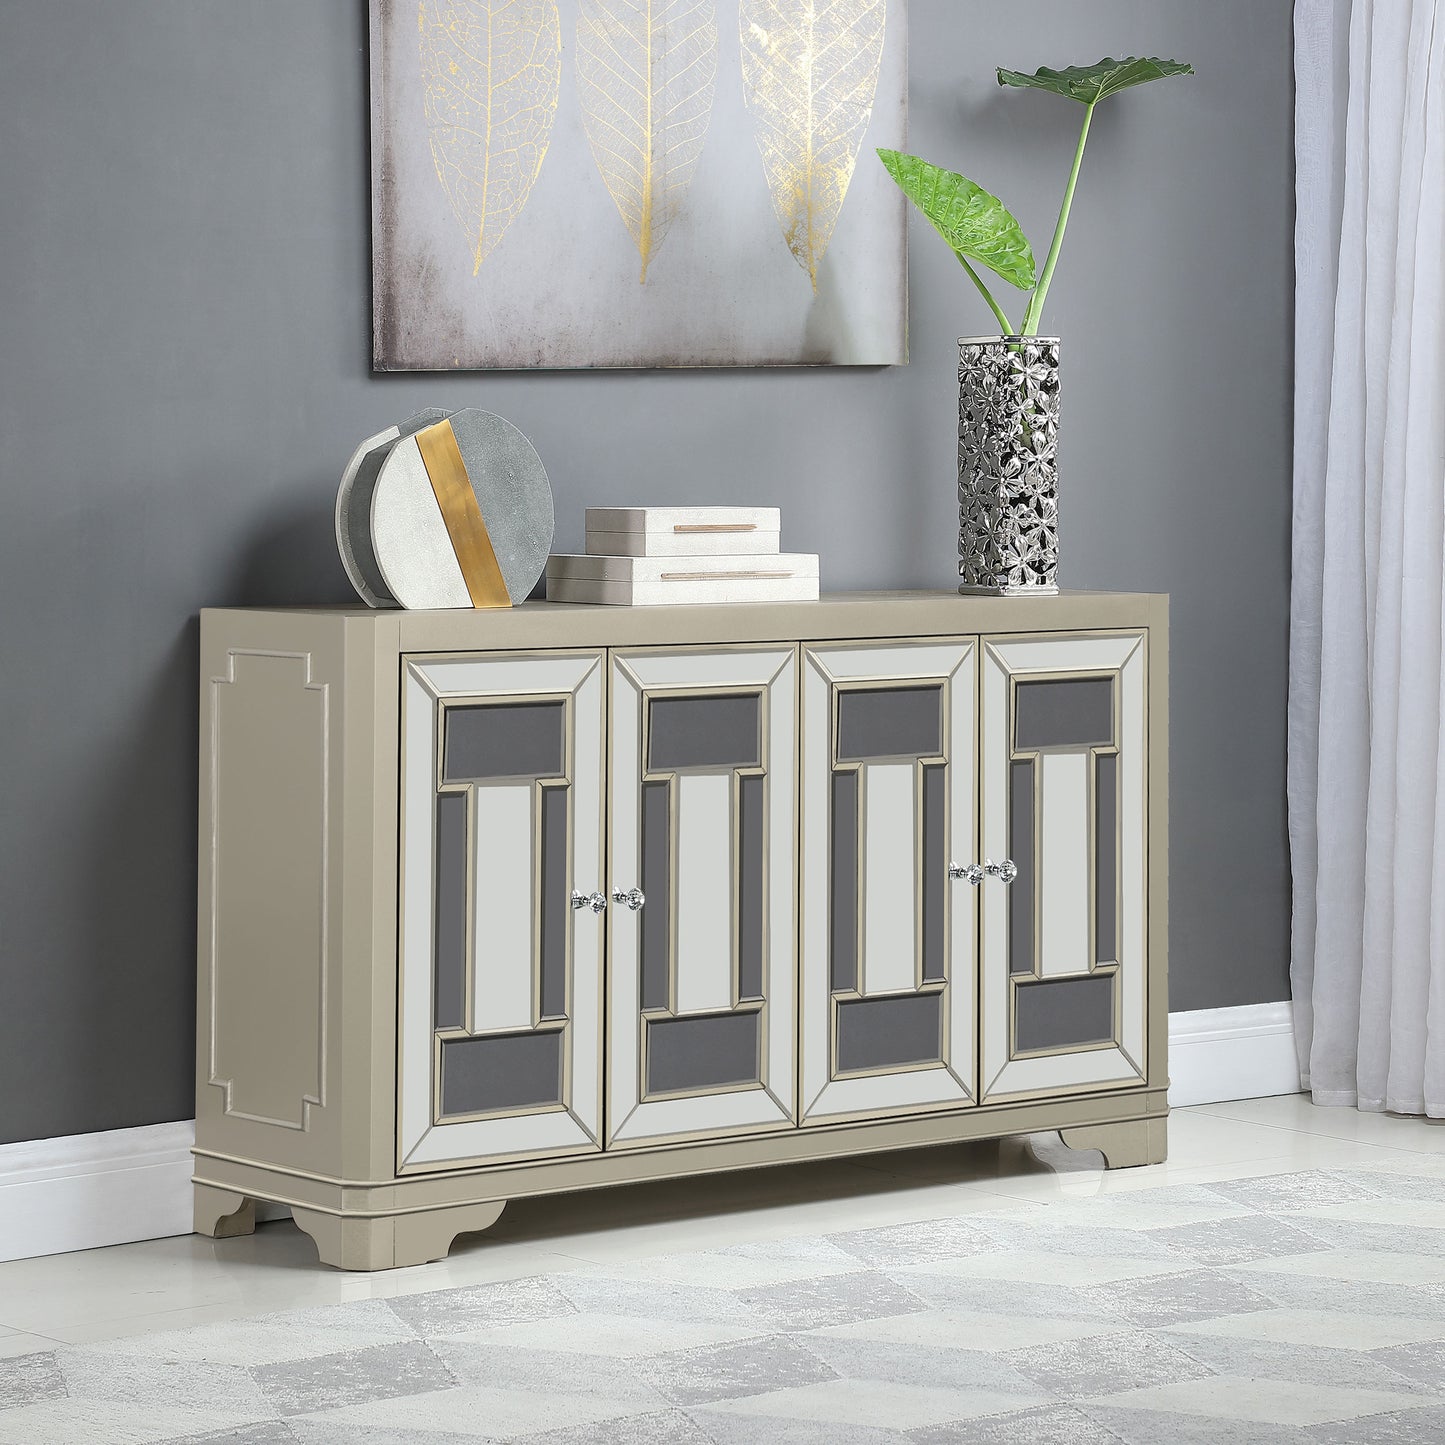 Toula 4-door Accent Cabinet Smoke and Champagne